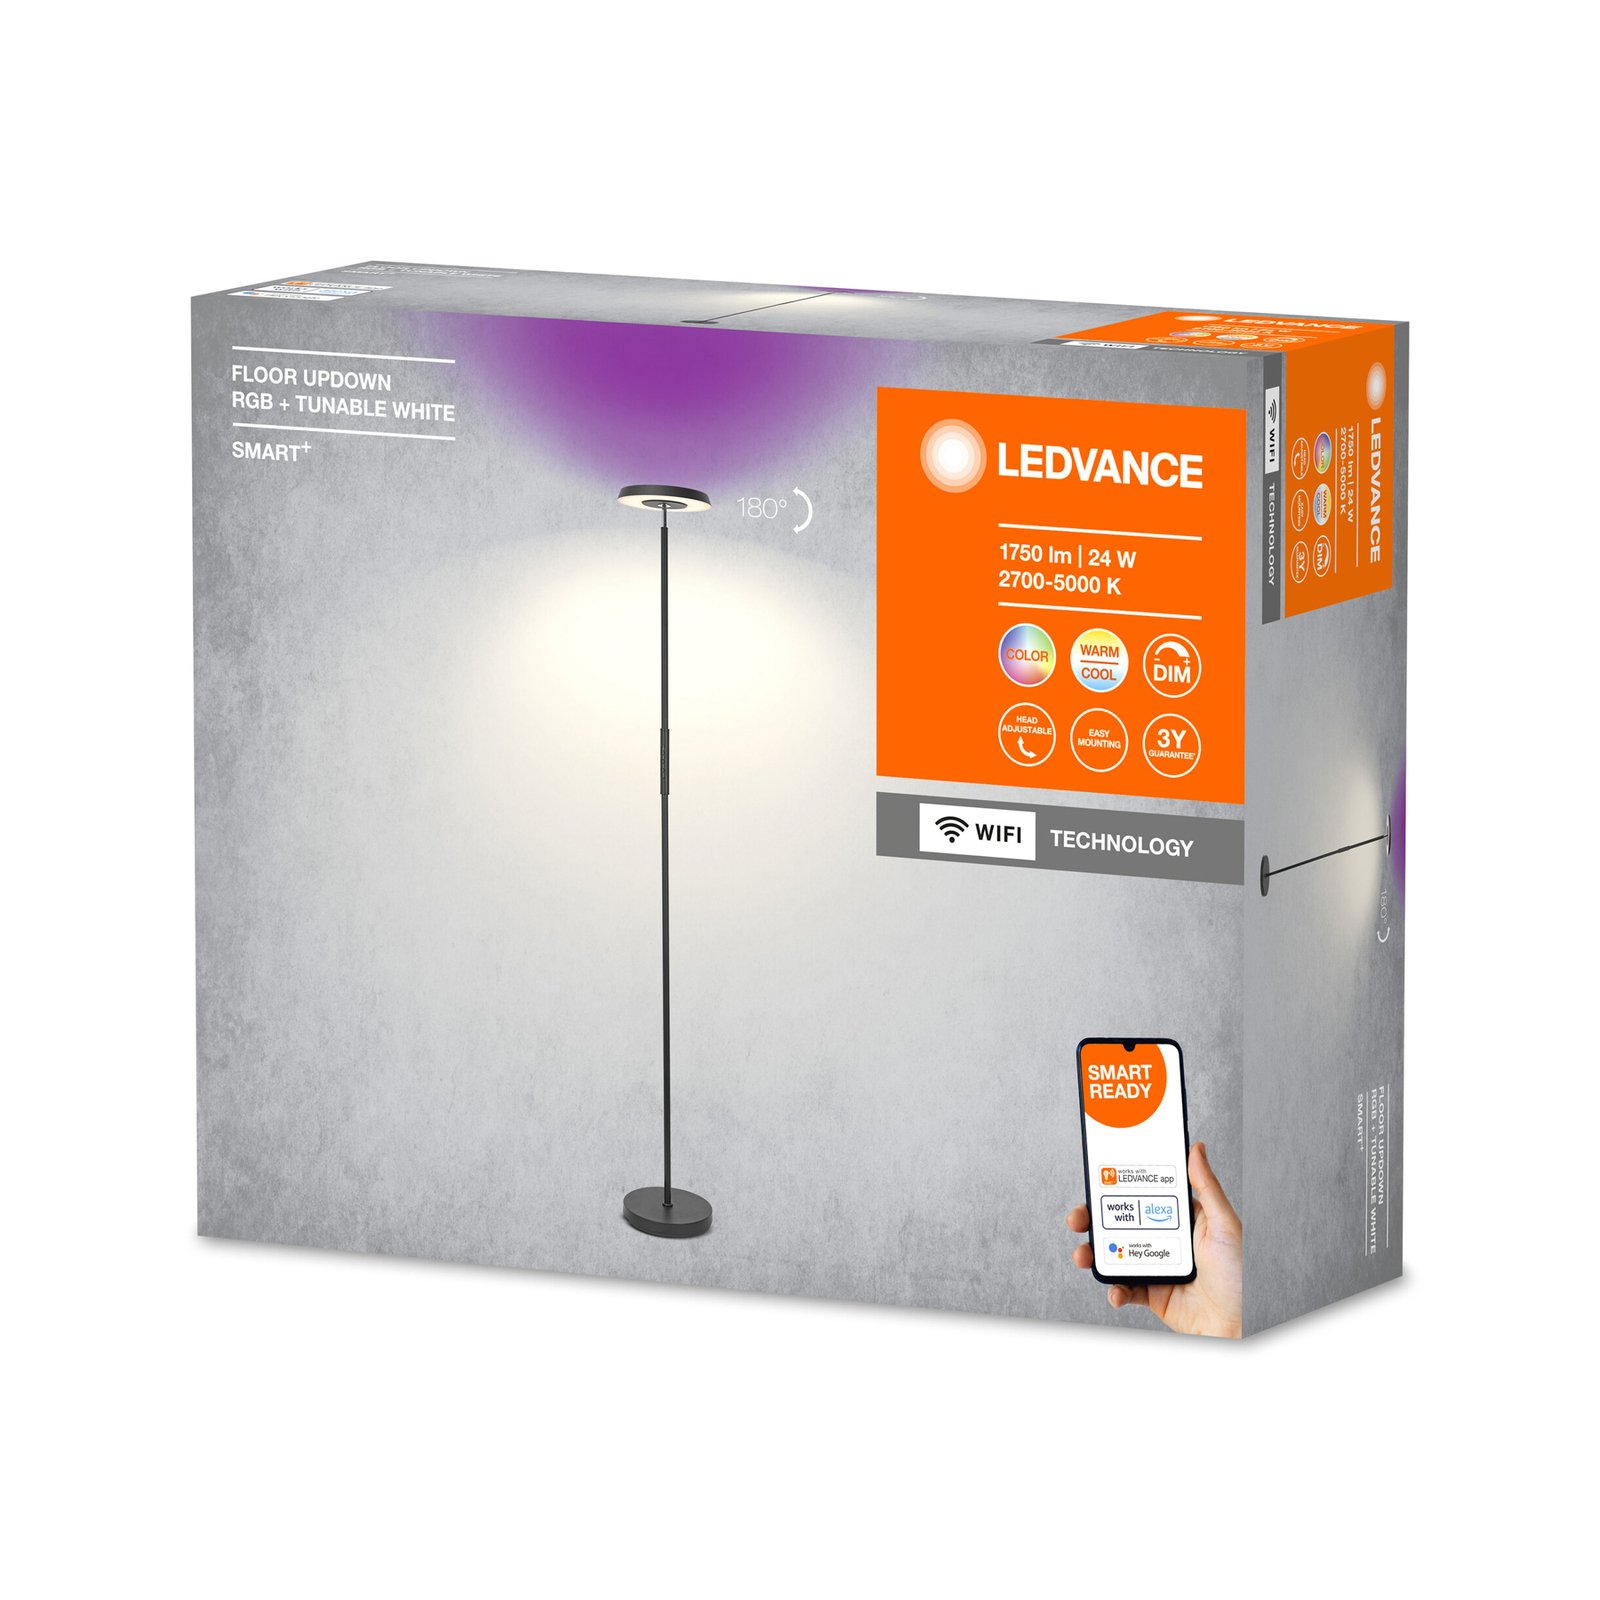 LEDVANCE SMART+ WiFi LED-Stehleuchte up/down RGBW